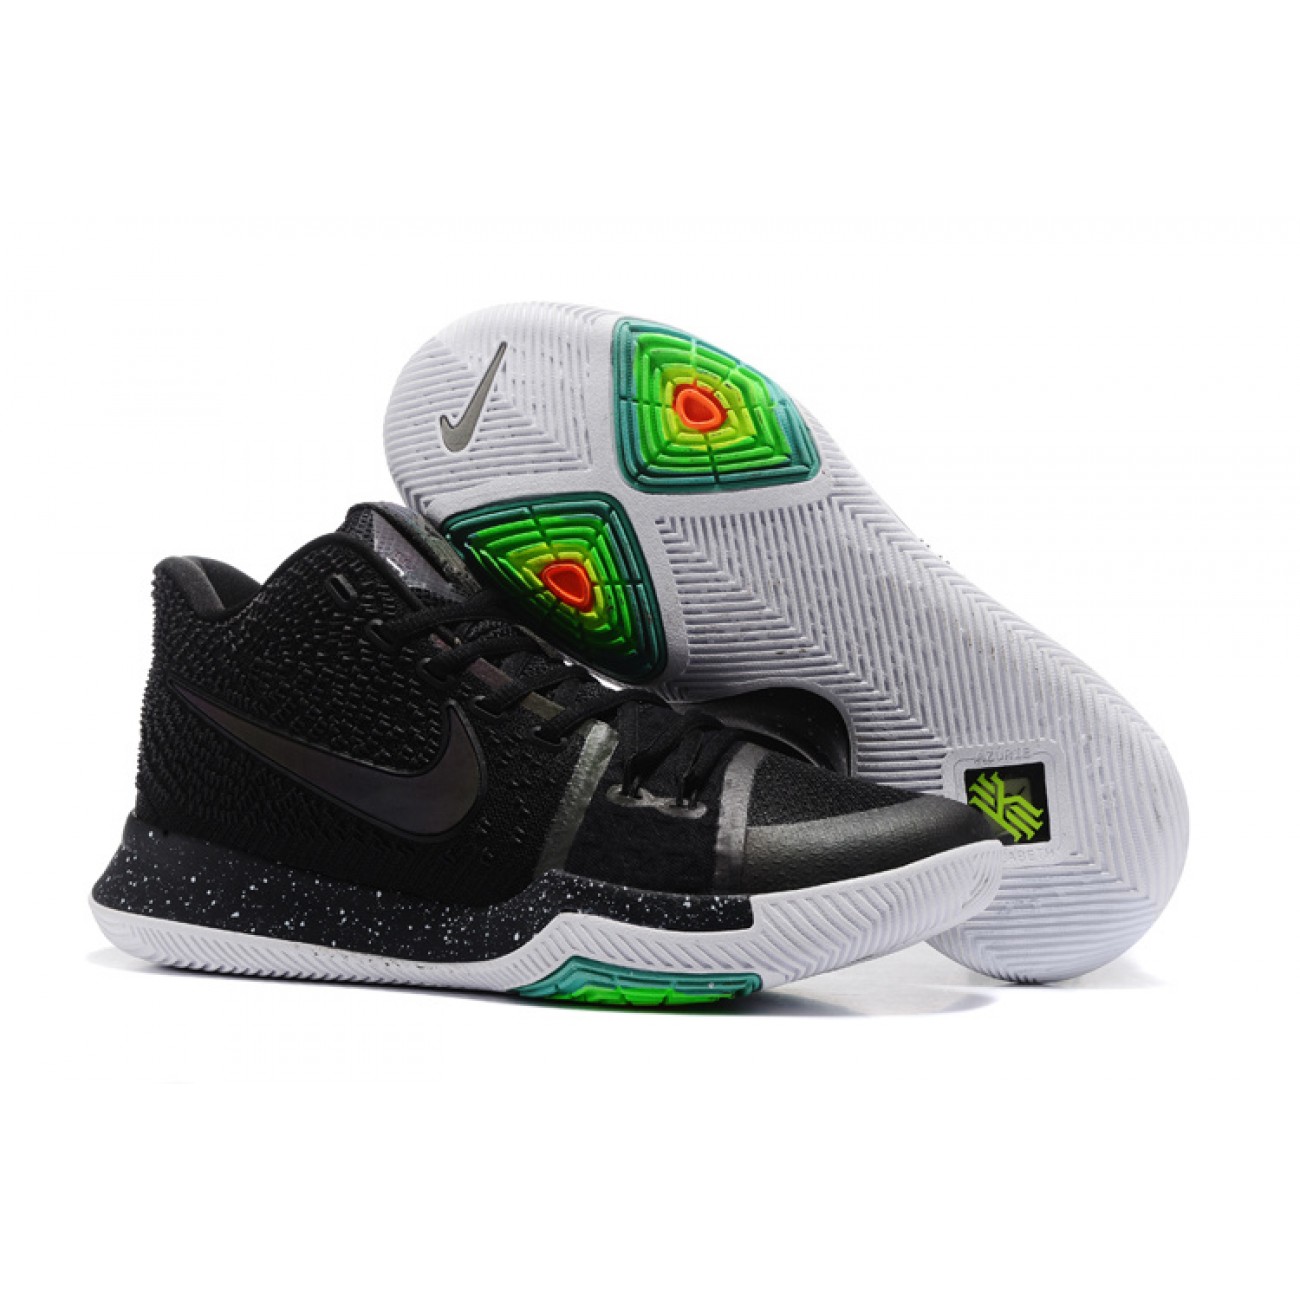 Kyrie 3 "Black Colorful"